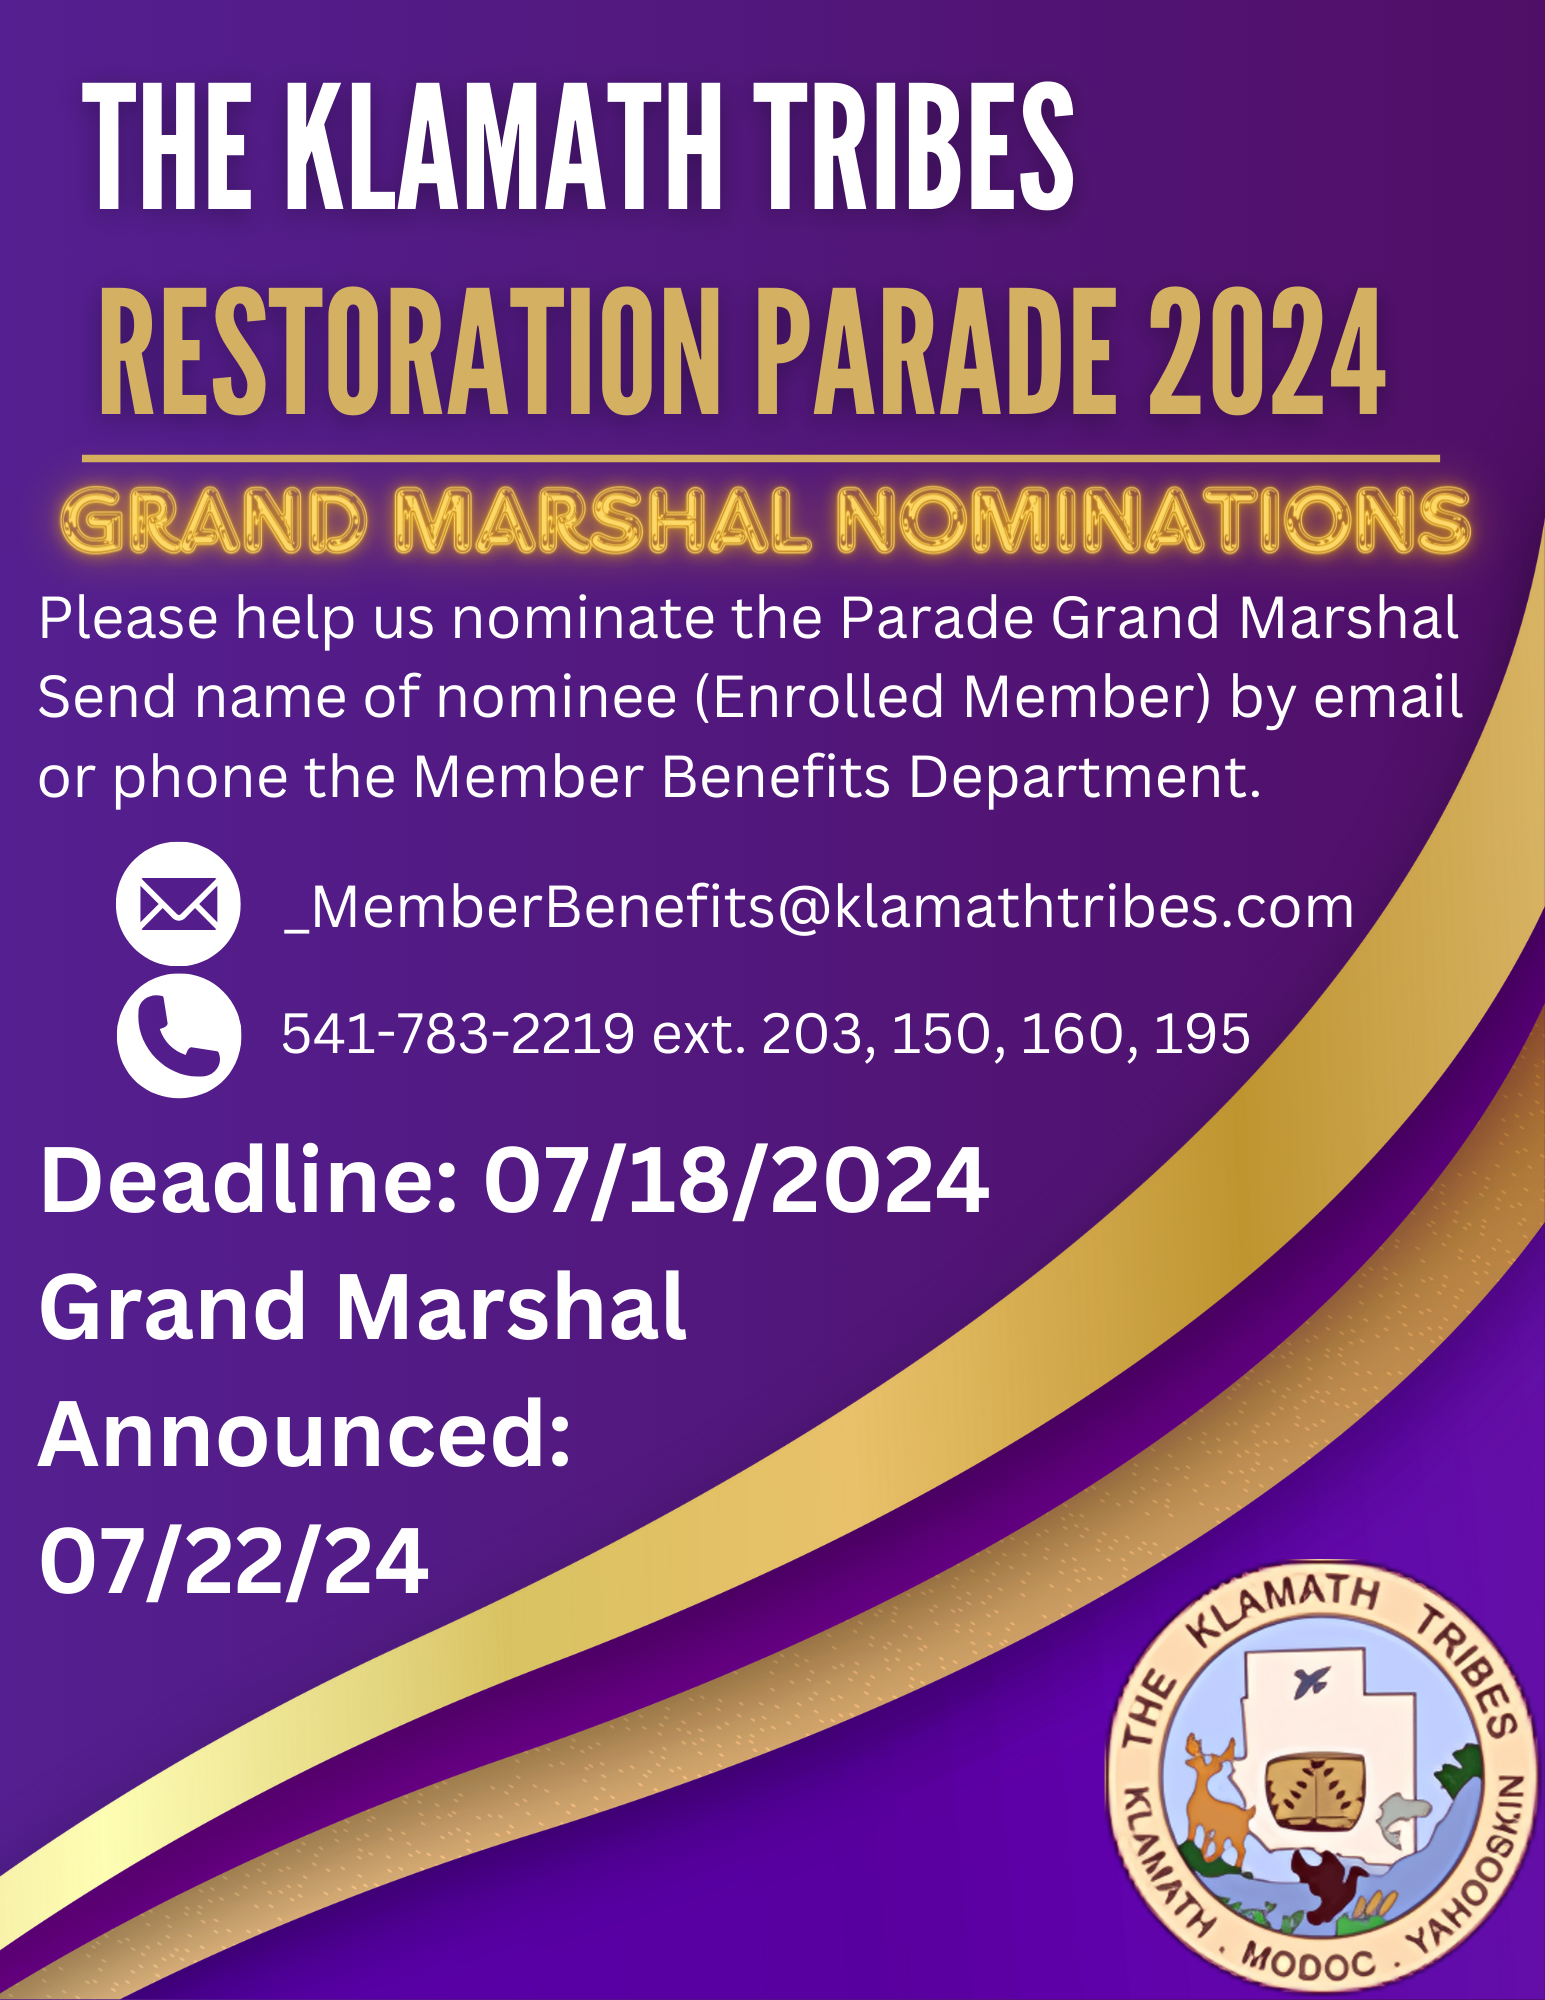 Flyer for the Restoration Parade 2024 Grand Marshal nominations, detailing how to nominate and contact information.